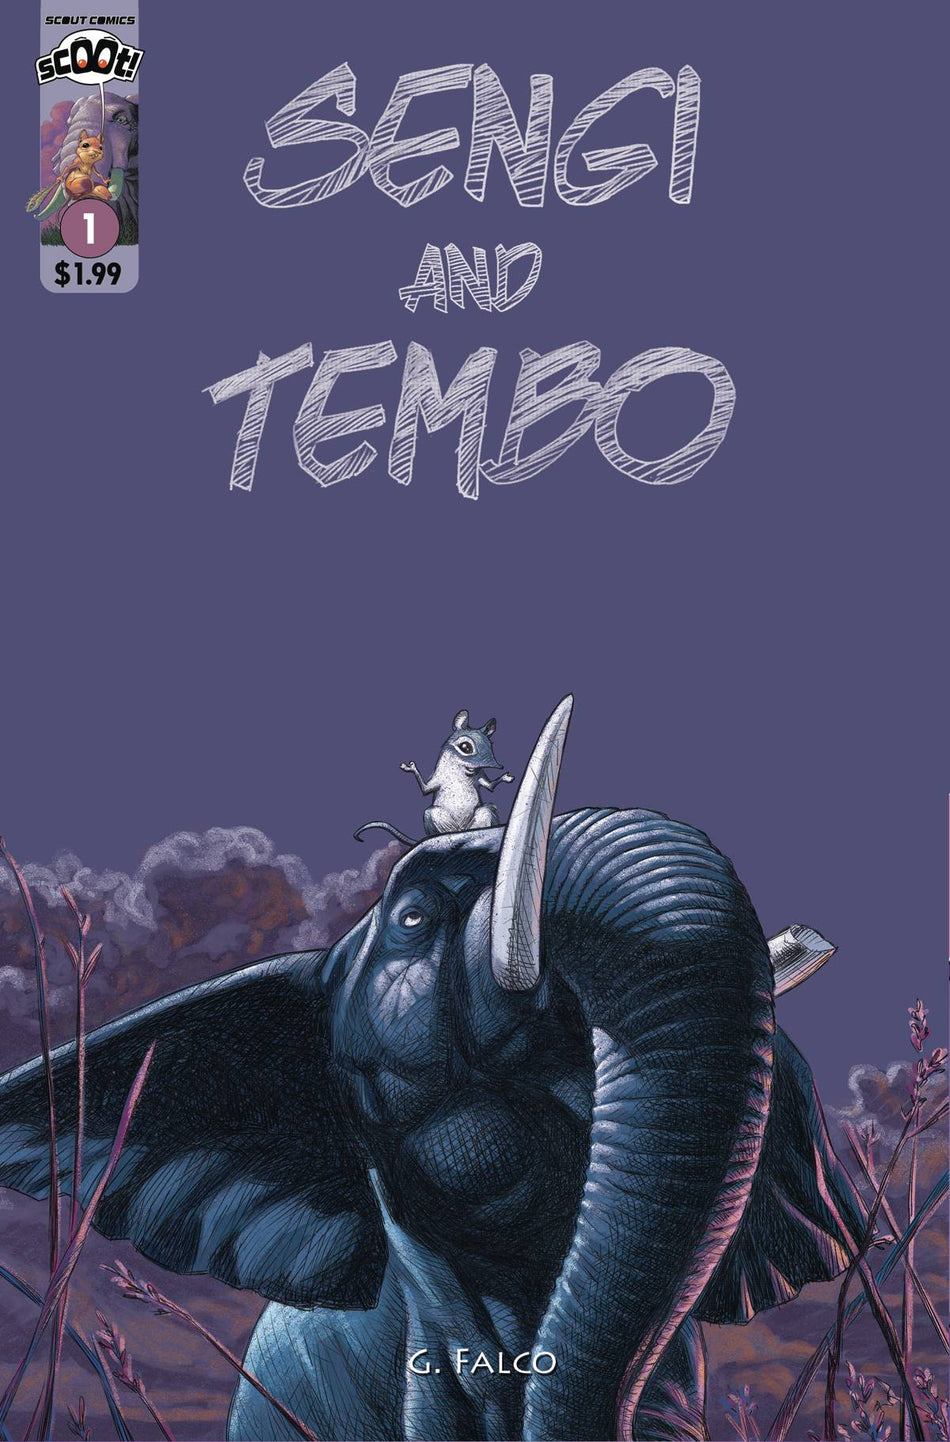 Photo of Sengi & Tembo Issue 1 comic sold by Stronghold Collectibles